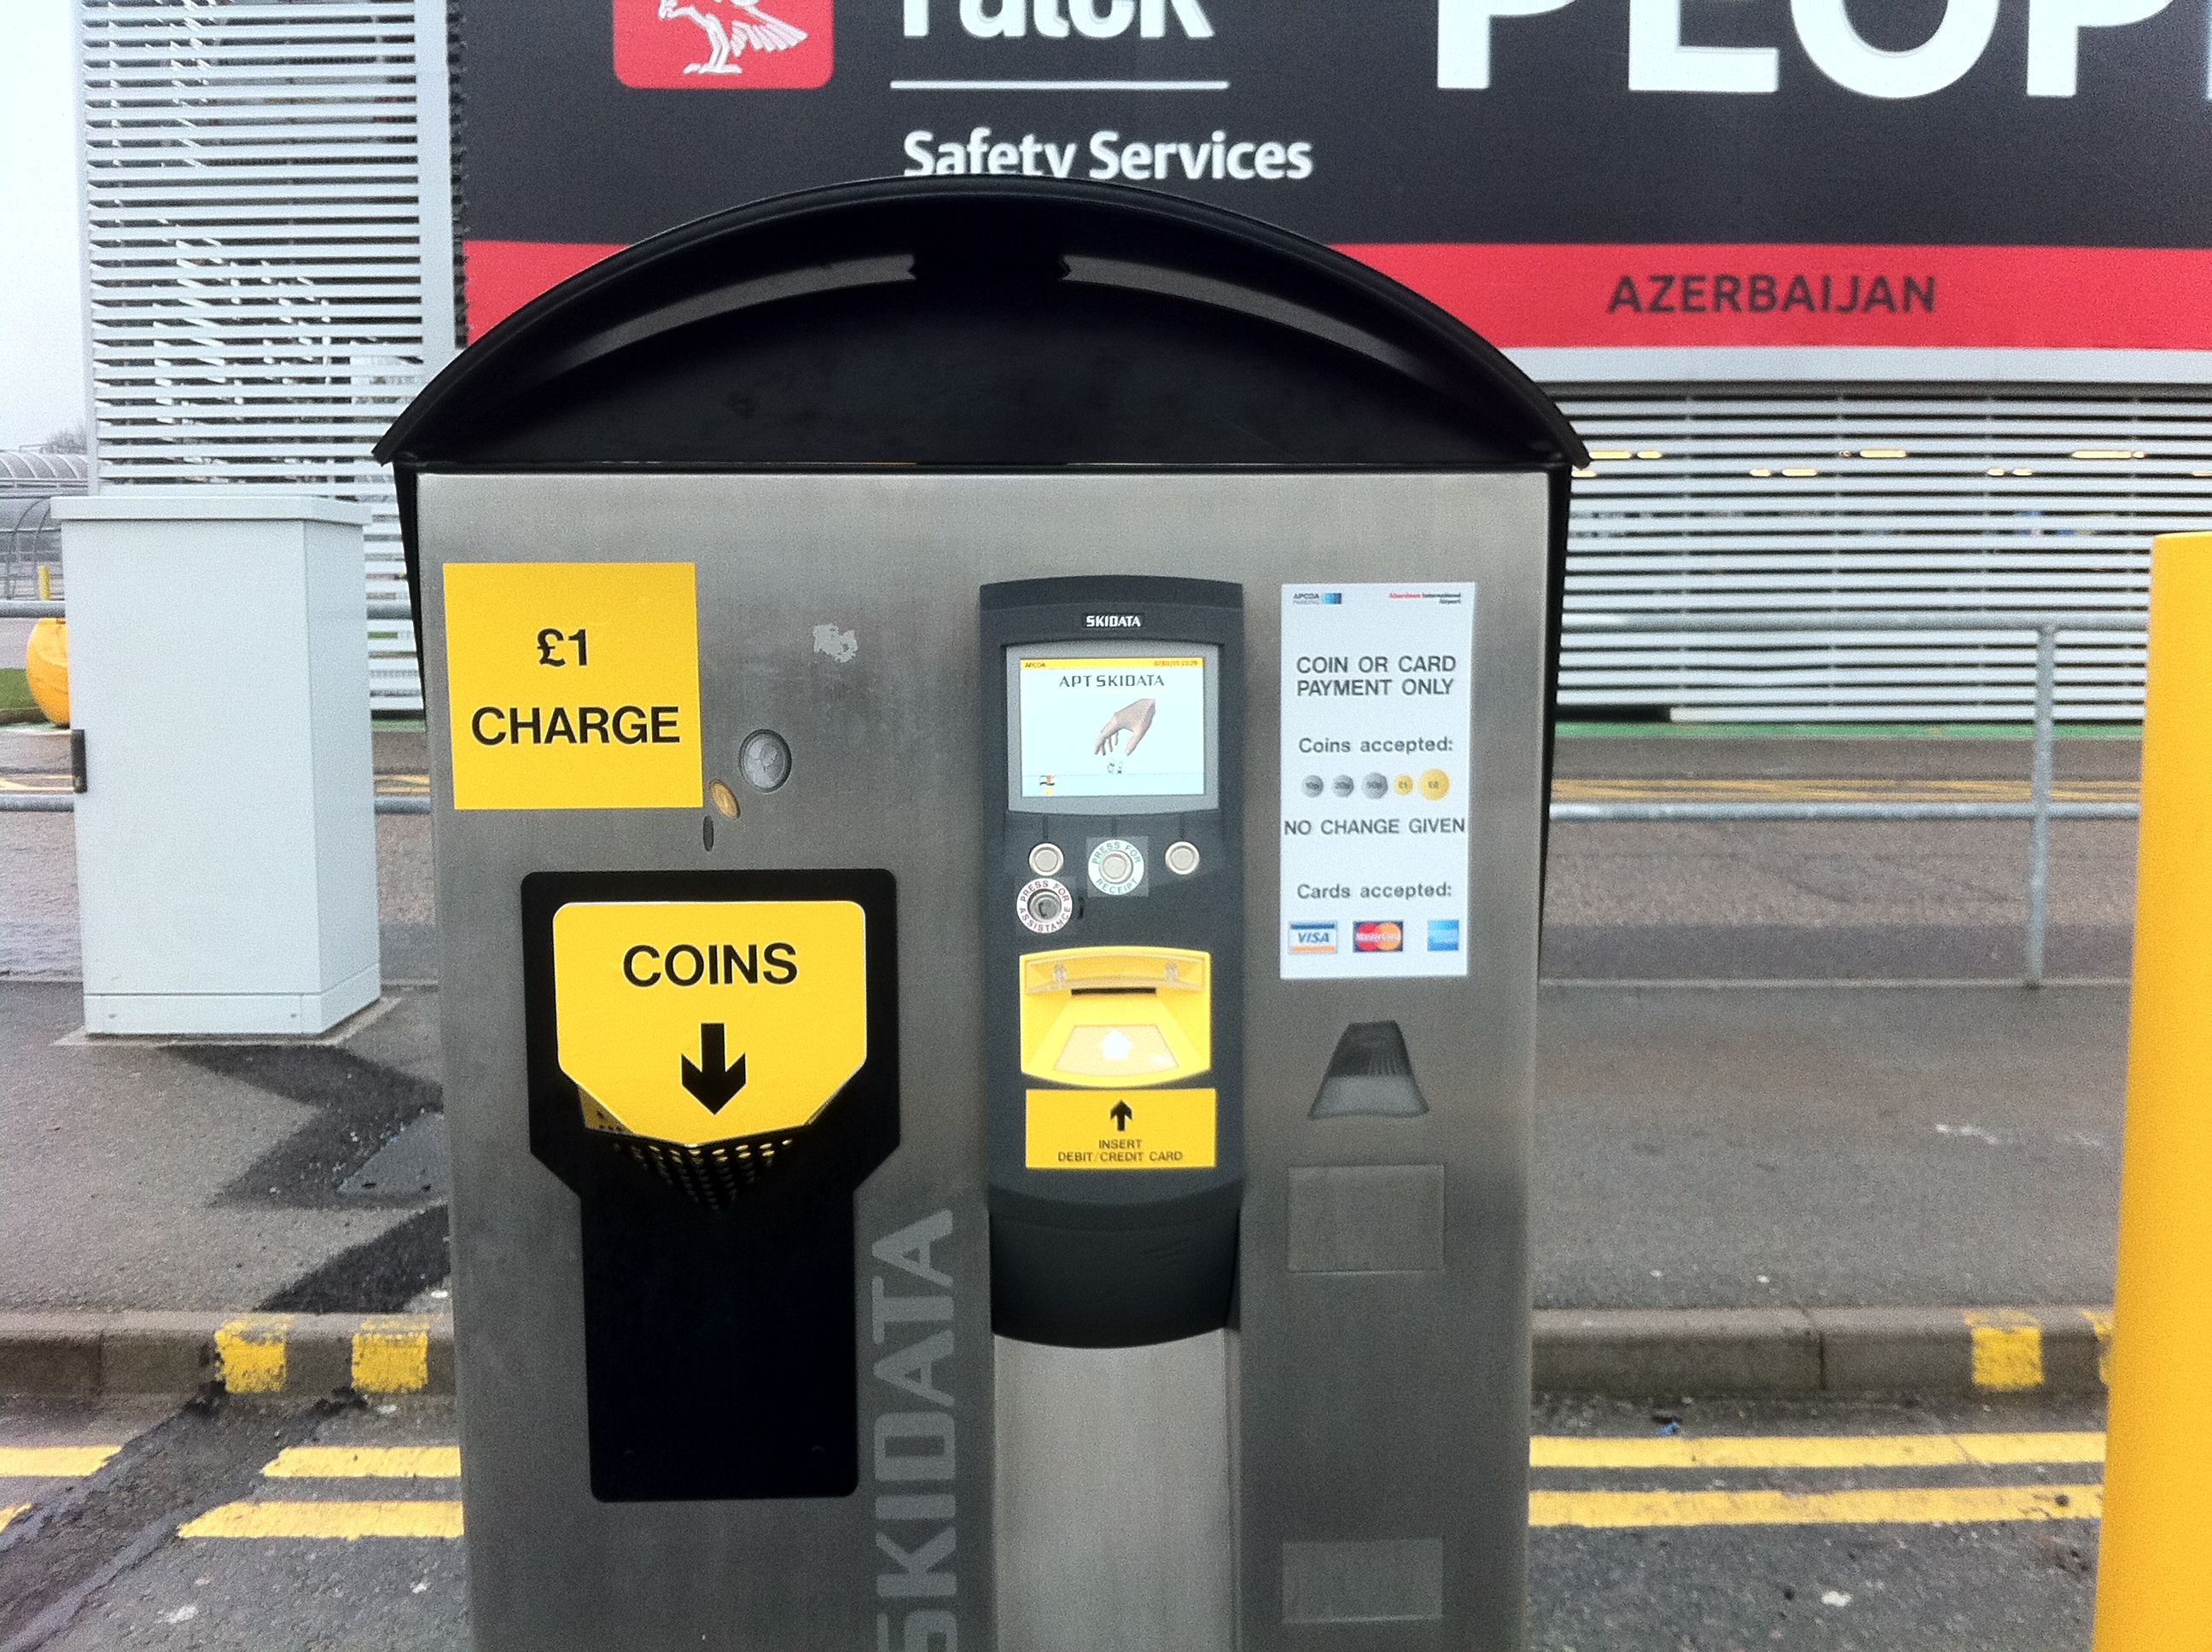 The new £1 drop-off charge at Aberdeen International Airport